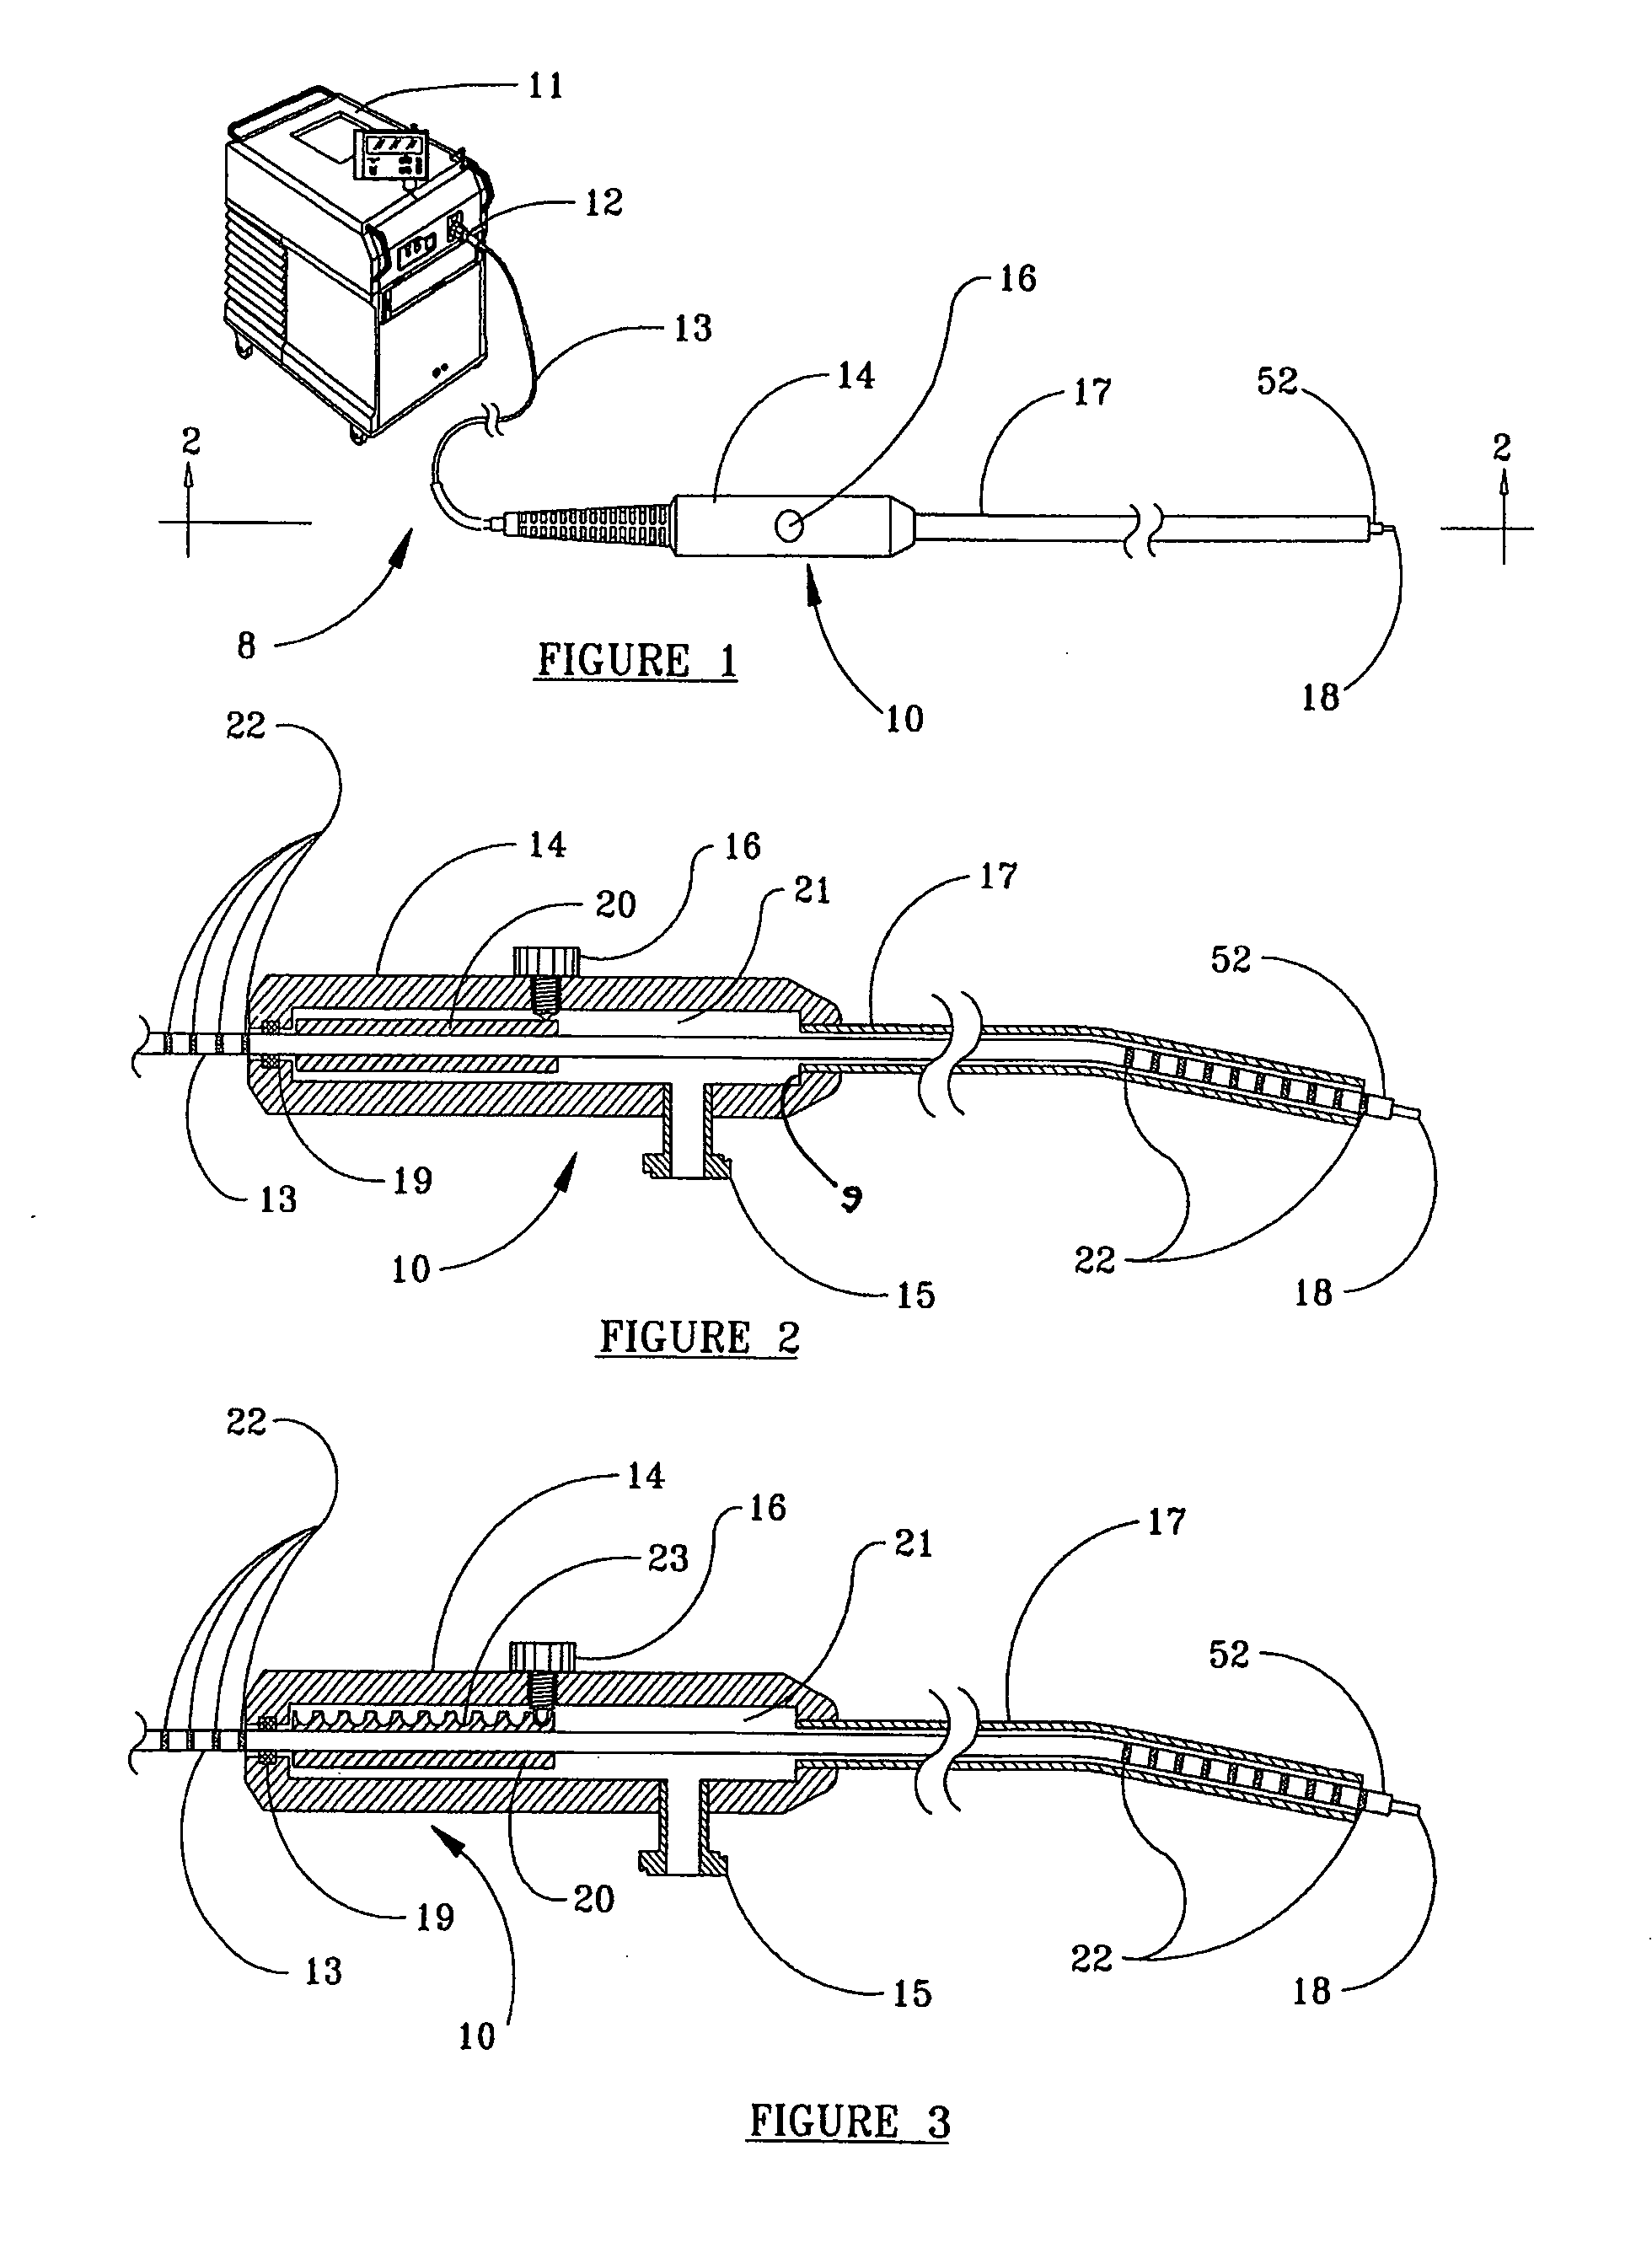 Fiber optic device with controlled reuse